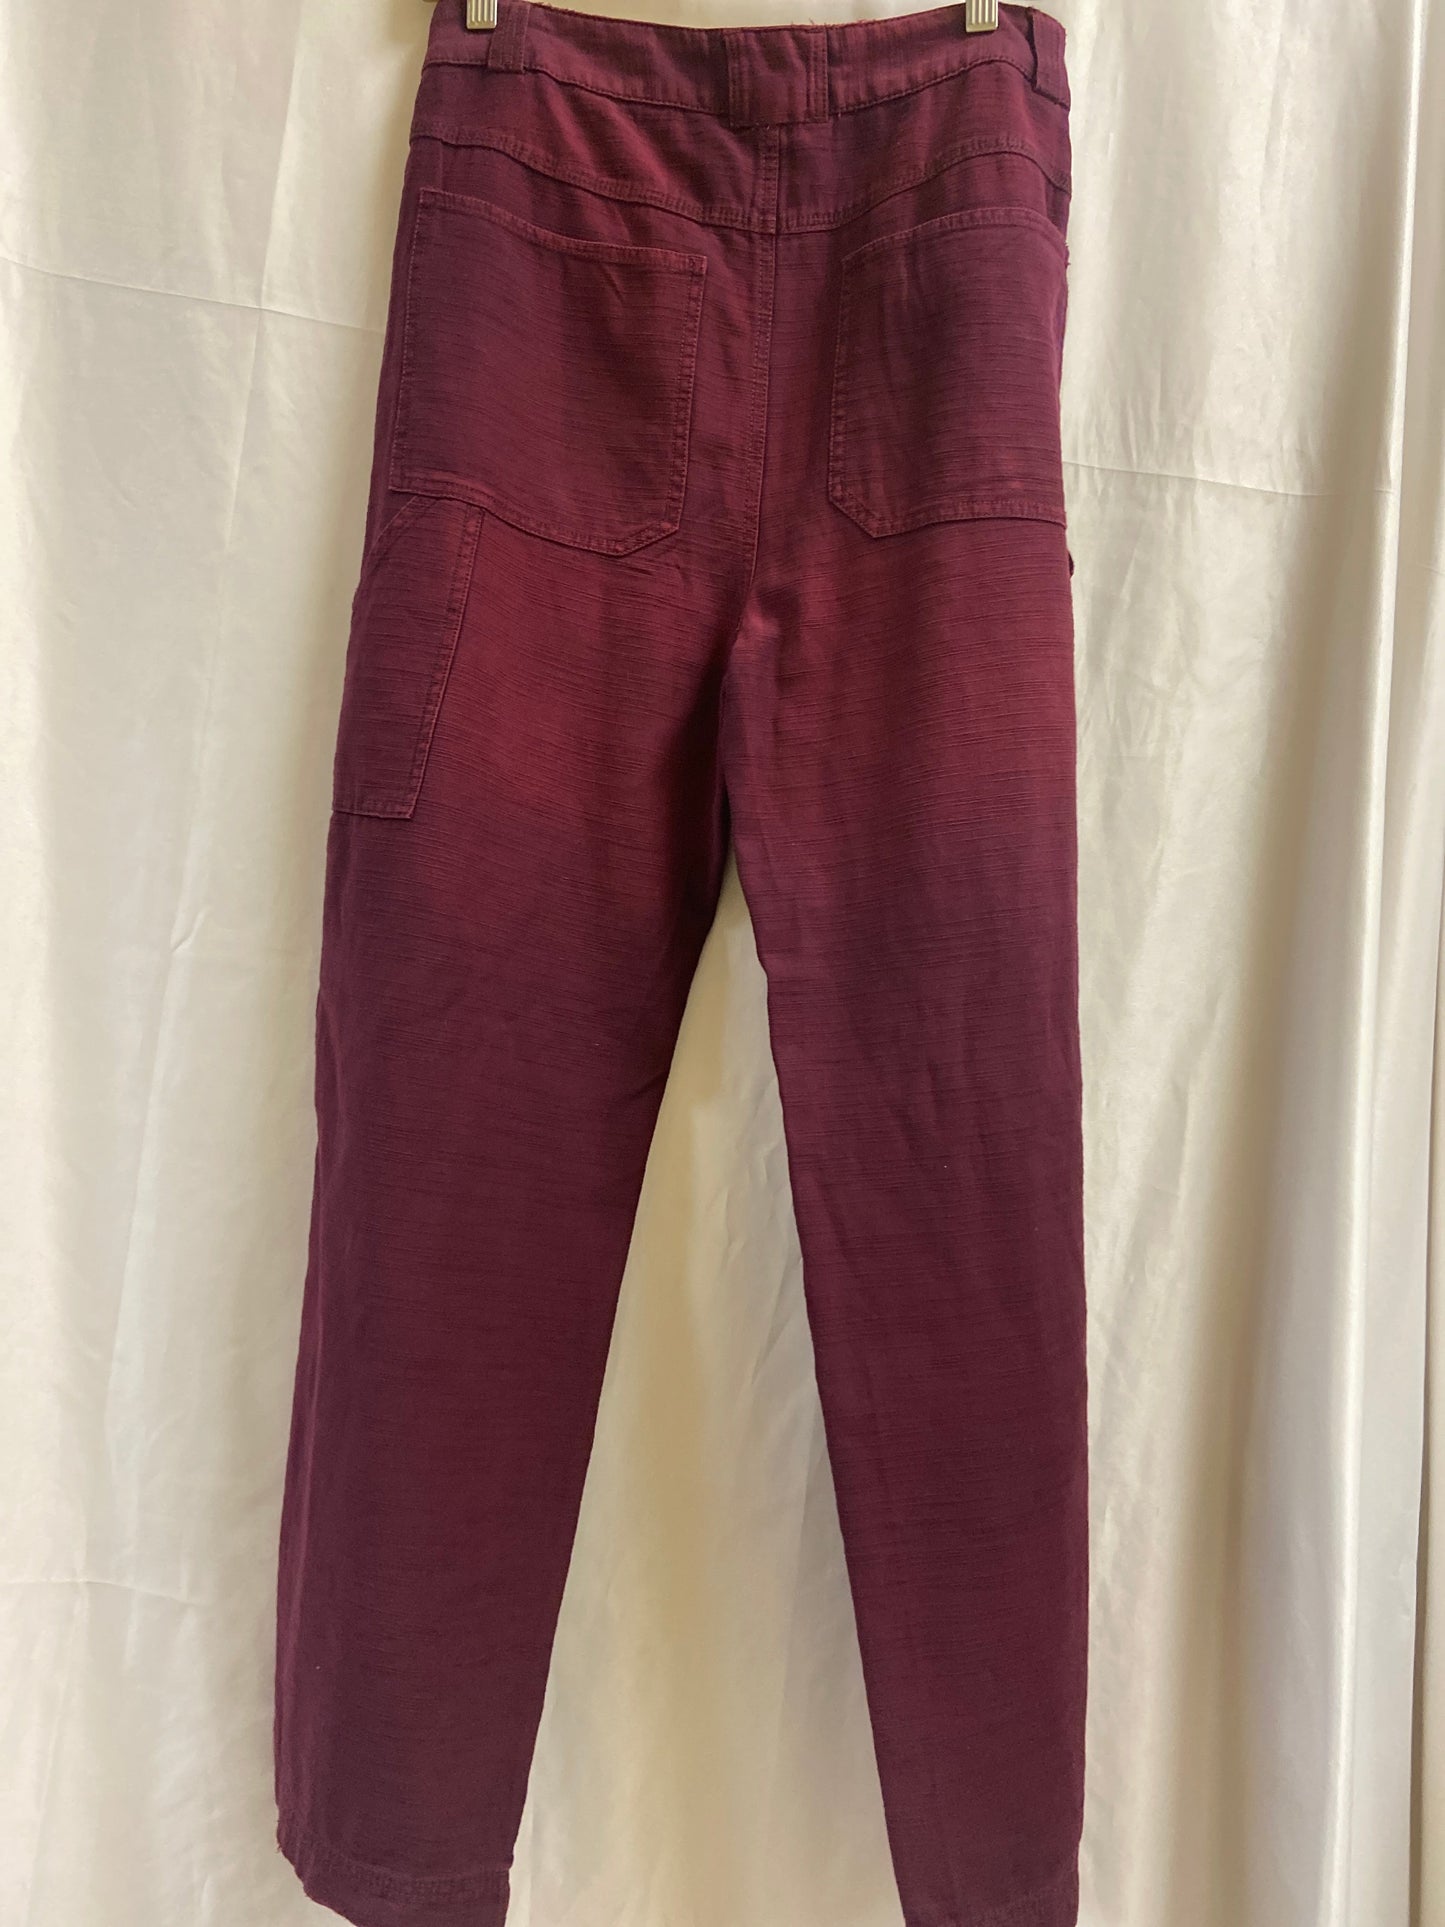 Pants Cargo & Utility By Free People  Size: 6